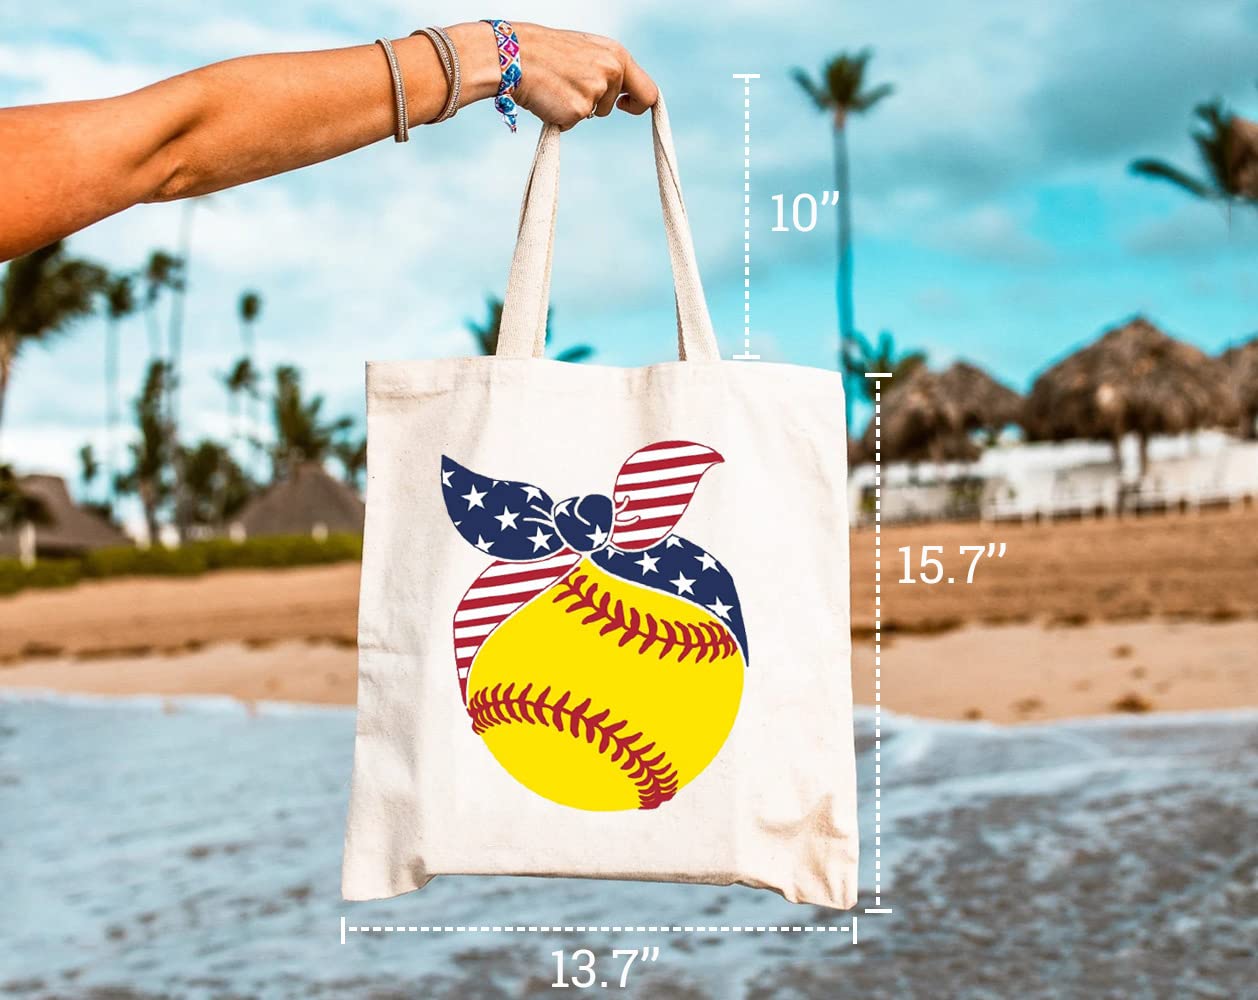 GXVUIS Softball Canvas Tote Bag for Women American Flag Bandana Reusable Travel Grocery Shoulder Shopping Bags Funny Gifts White